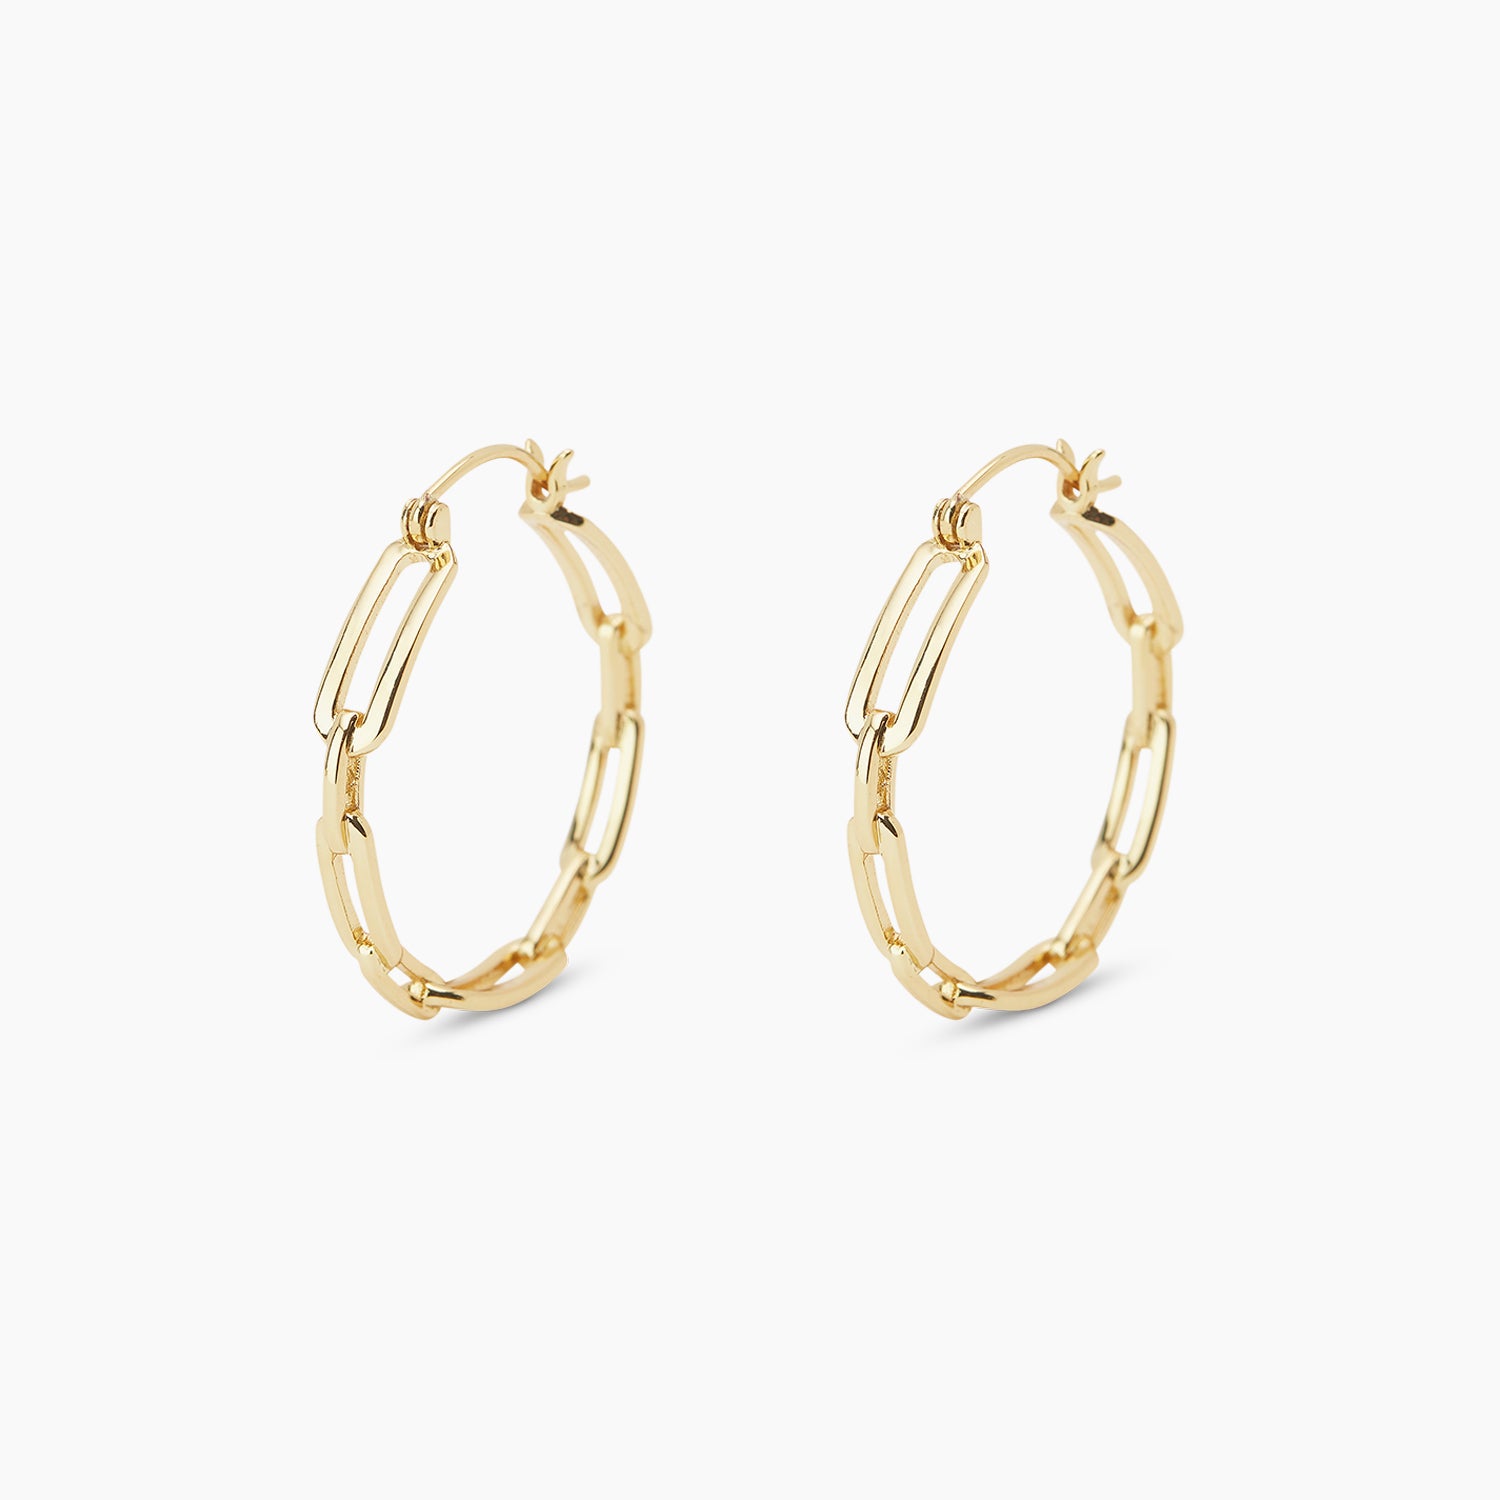 Maria Wants to Swap Her Gold Hoops For These Gold Chain Earrings -  Fashionista